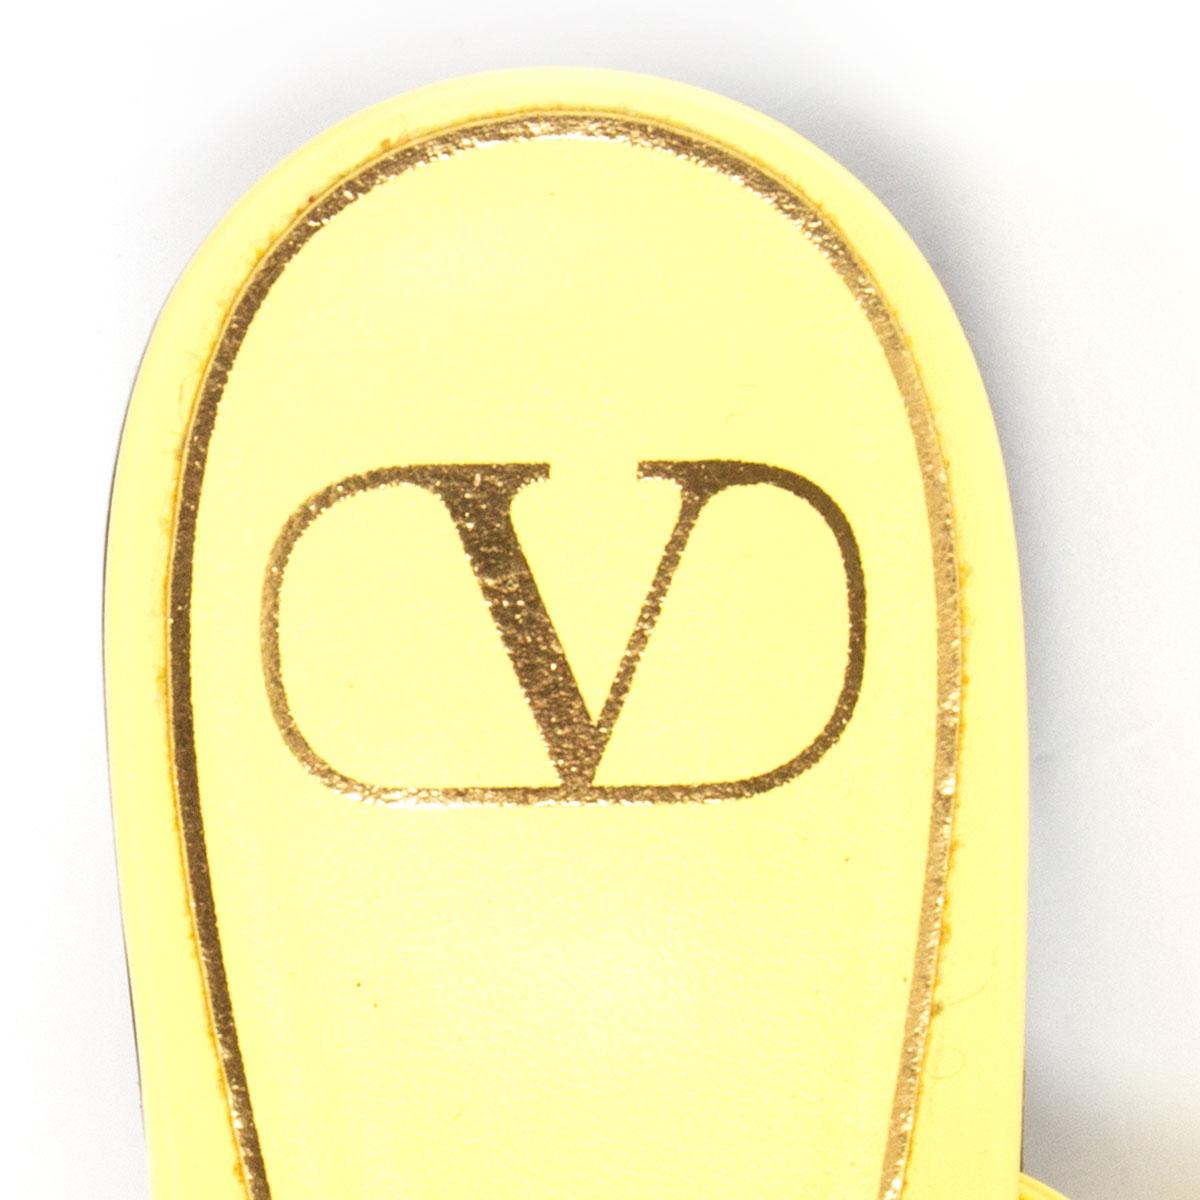 VALENTINO Lime Sorbet yellow leather ROMAN STUD Ballet Flats Shoes 38 1